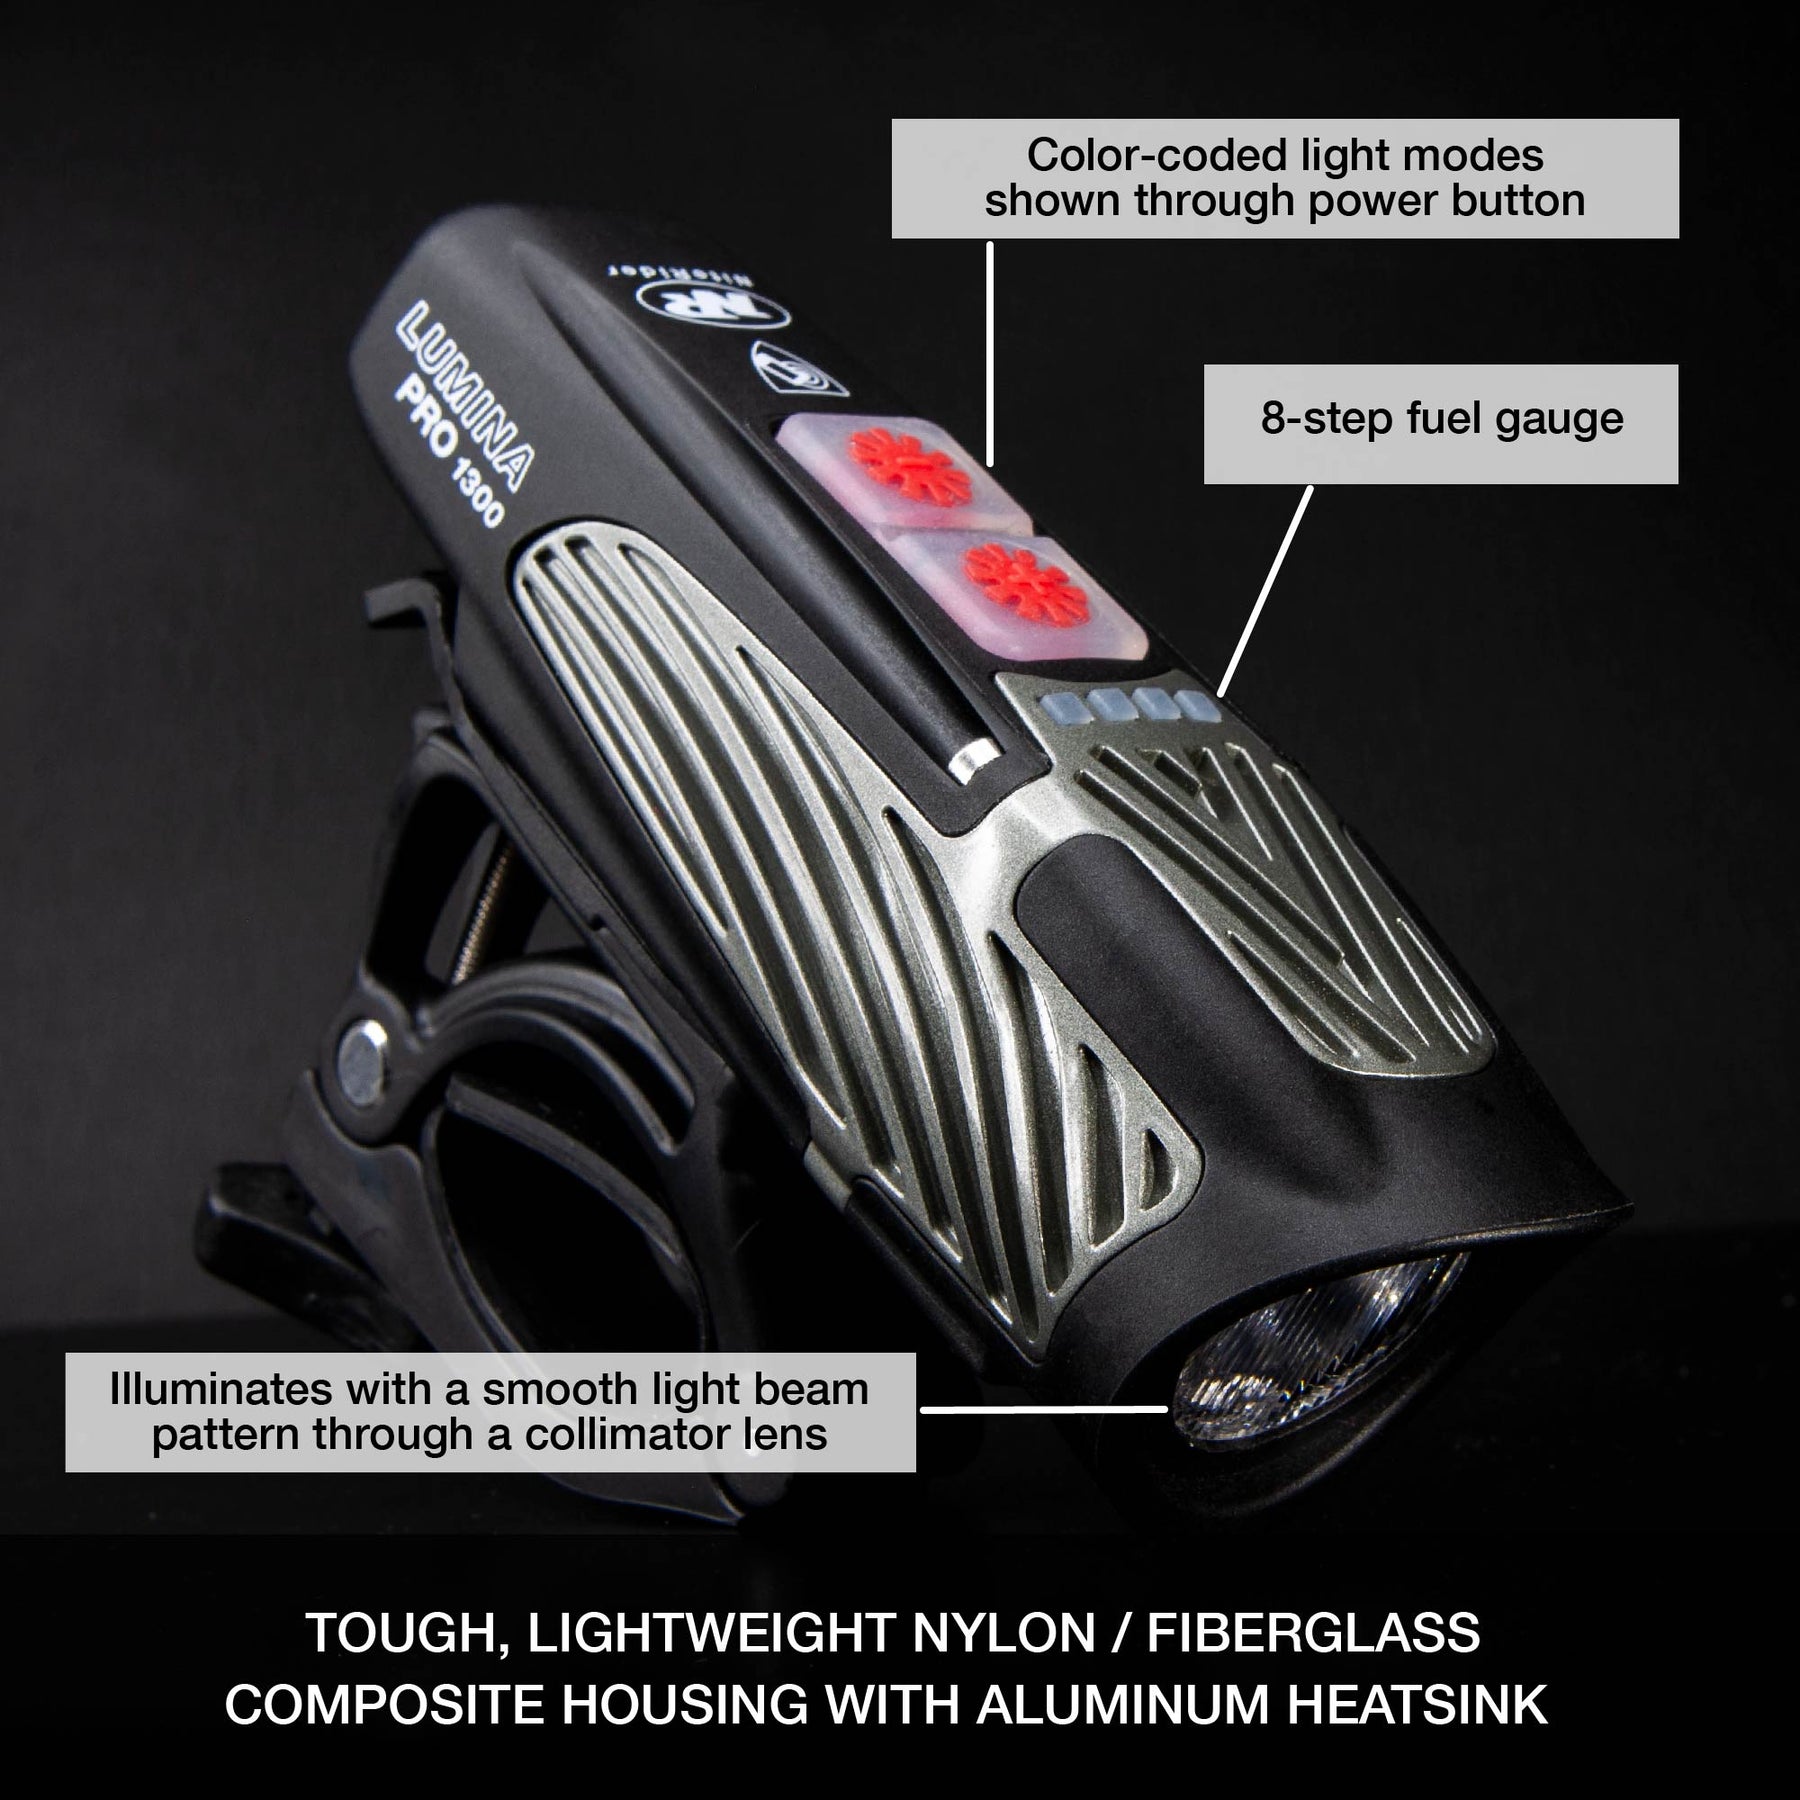 Niterider Digital Patrol Combo Lighting, Siren and Taillight System –  Bicycle Patrol Outfitters, LLC